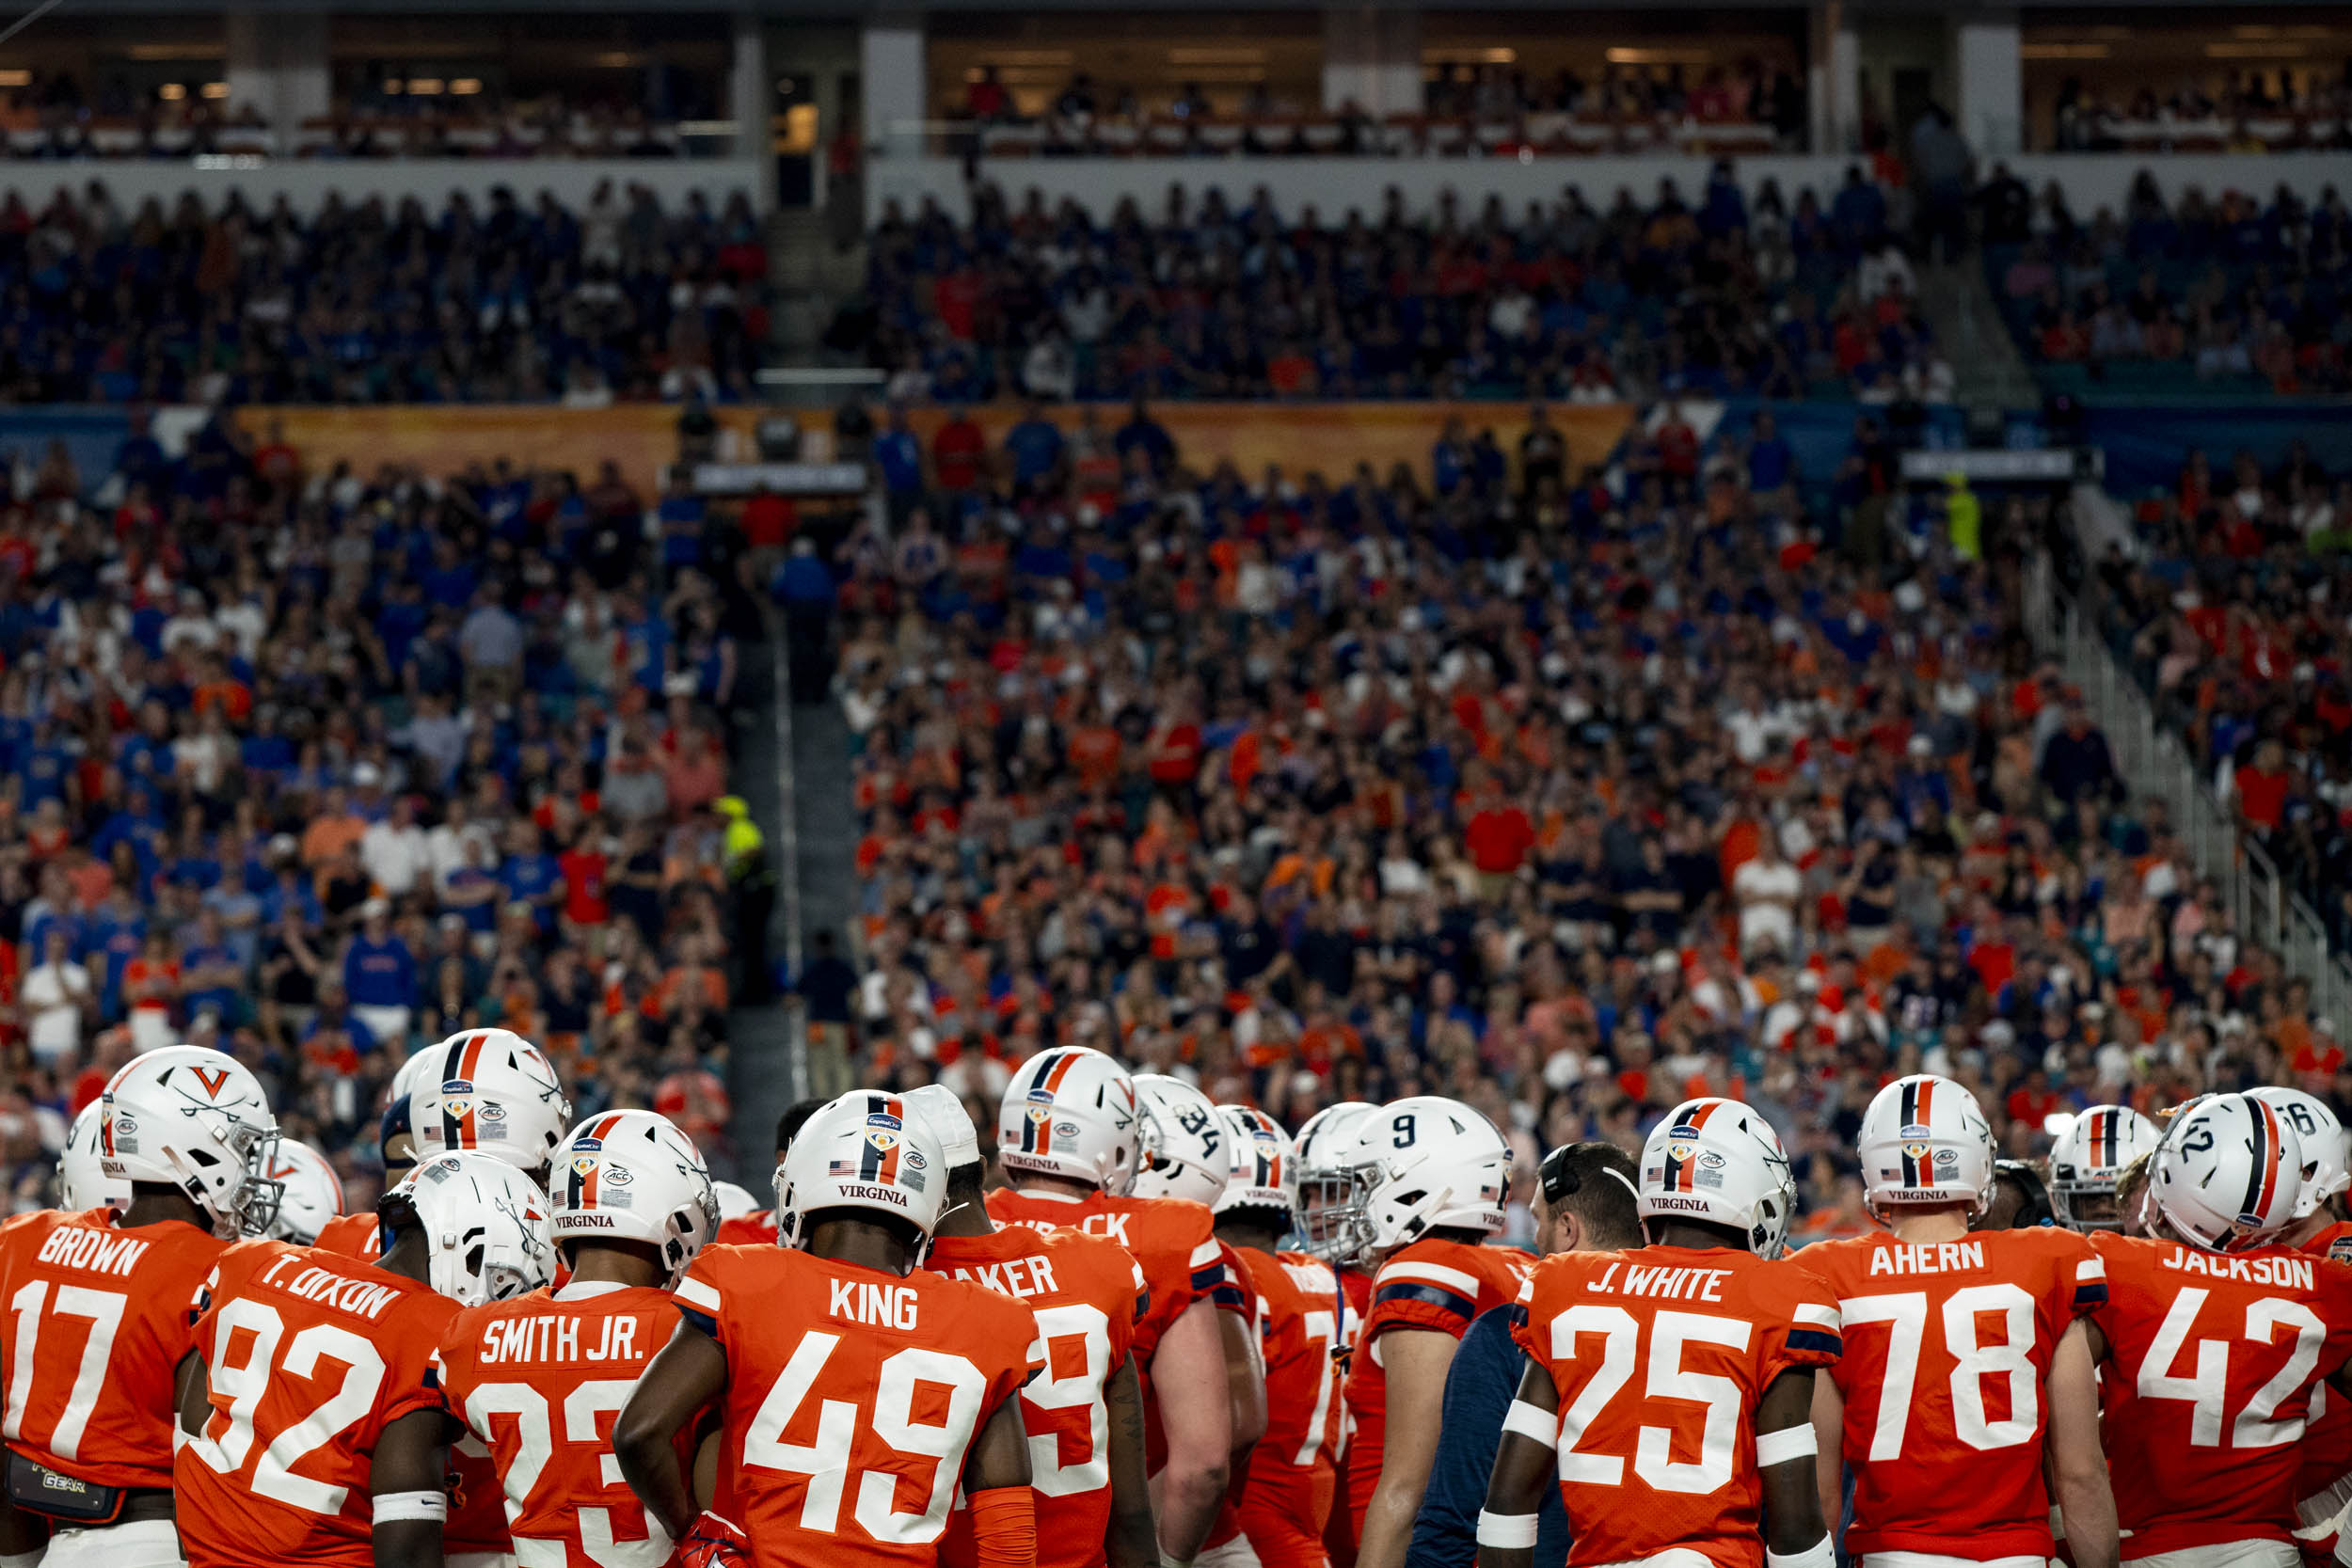 UVA football team huddled up during a game